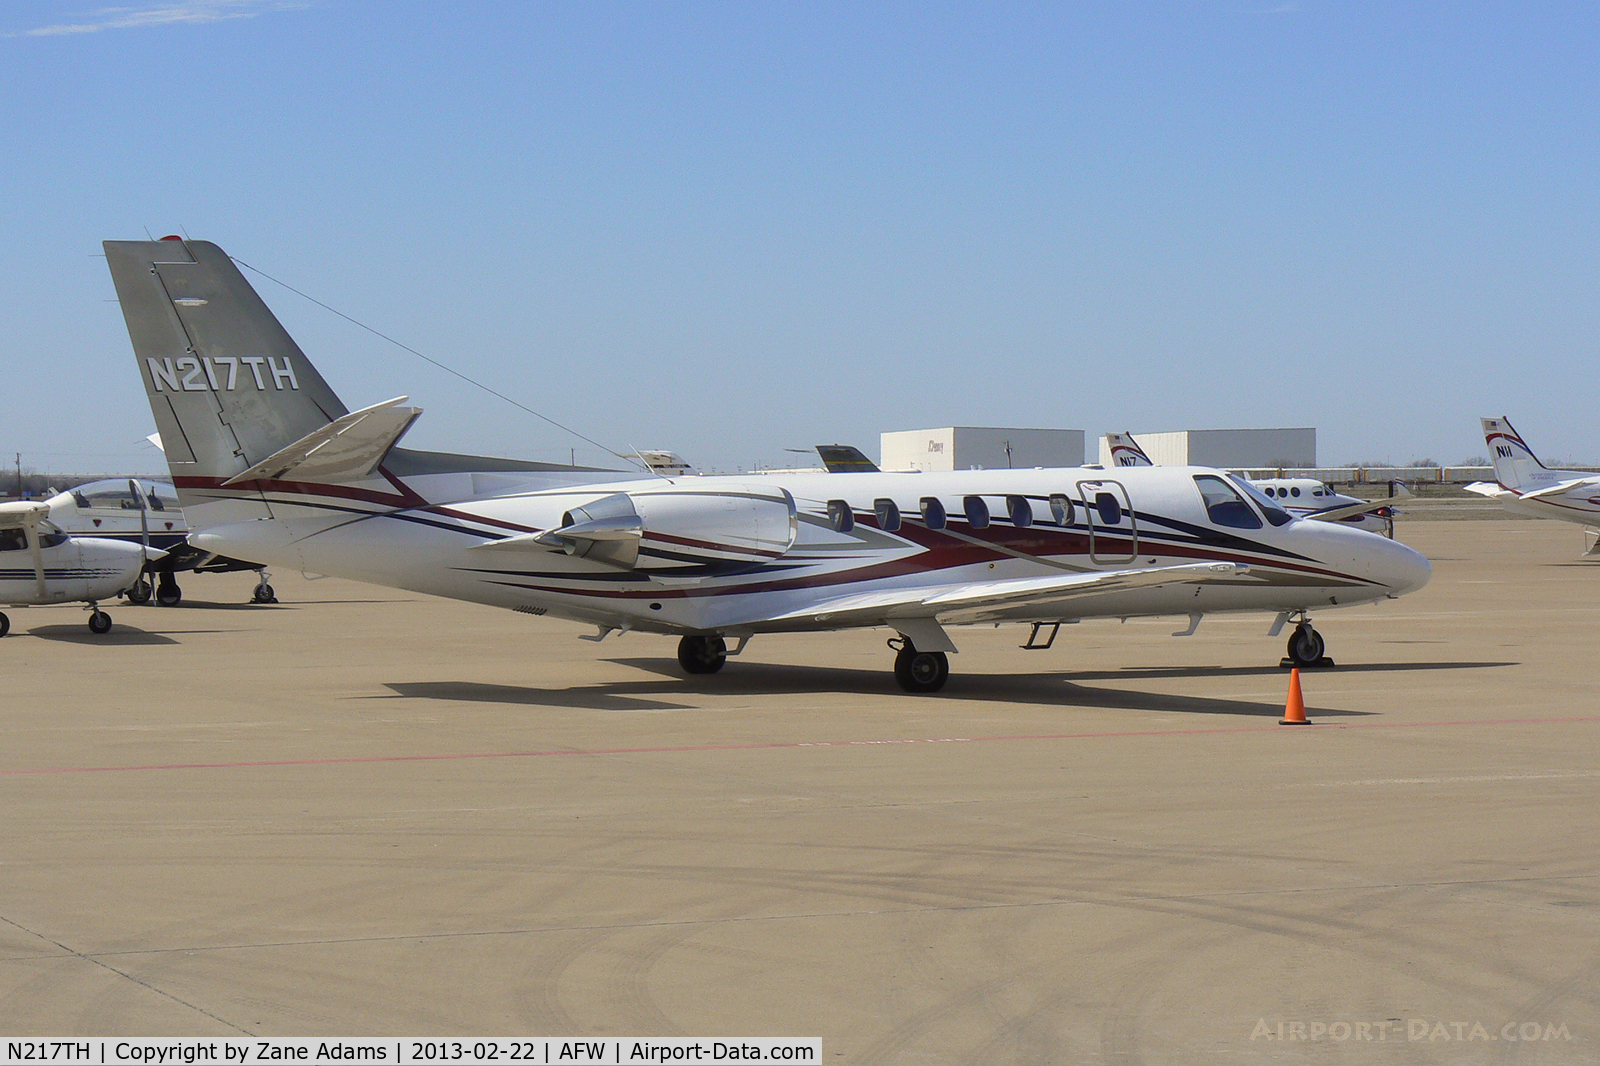 N217TH, 1996 Cessna 560 Citation Ultra C/N 560-0390, On the ramp at Alliance Airport - Fort Worth, TX